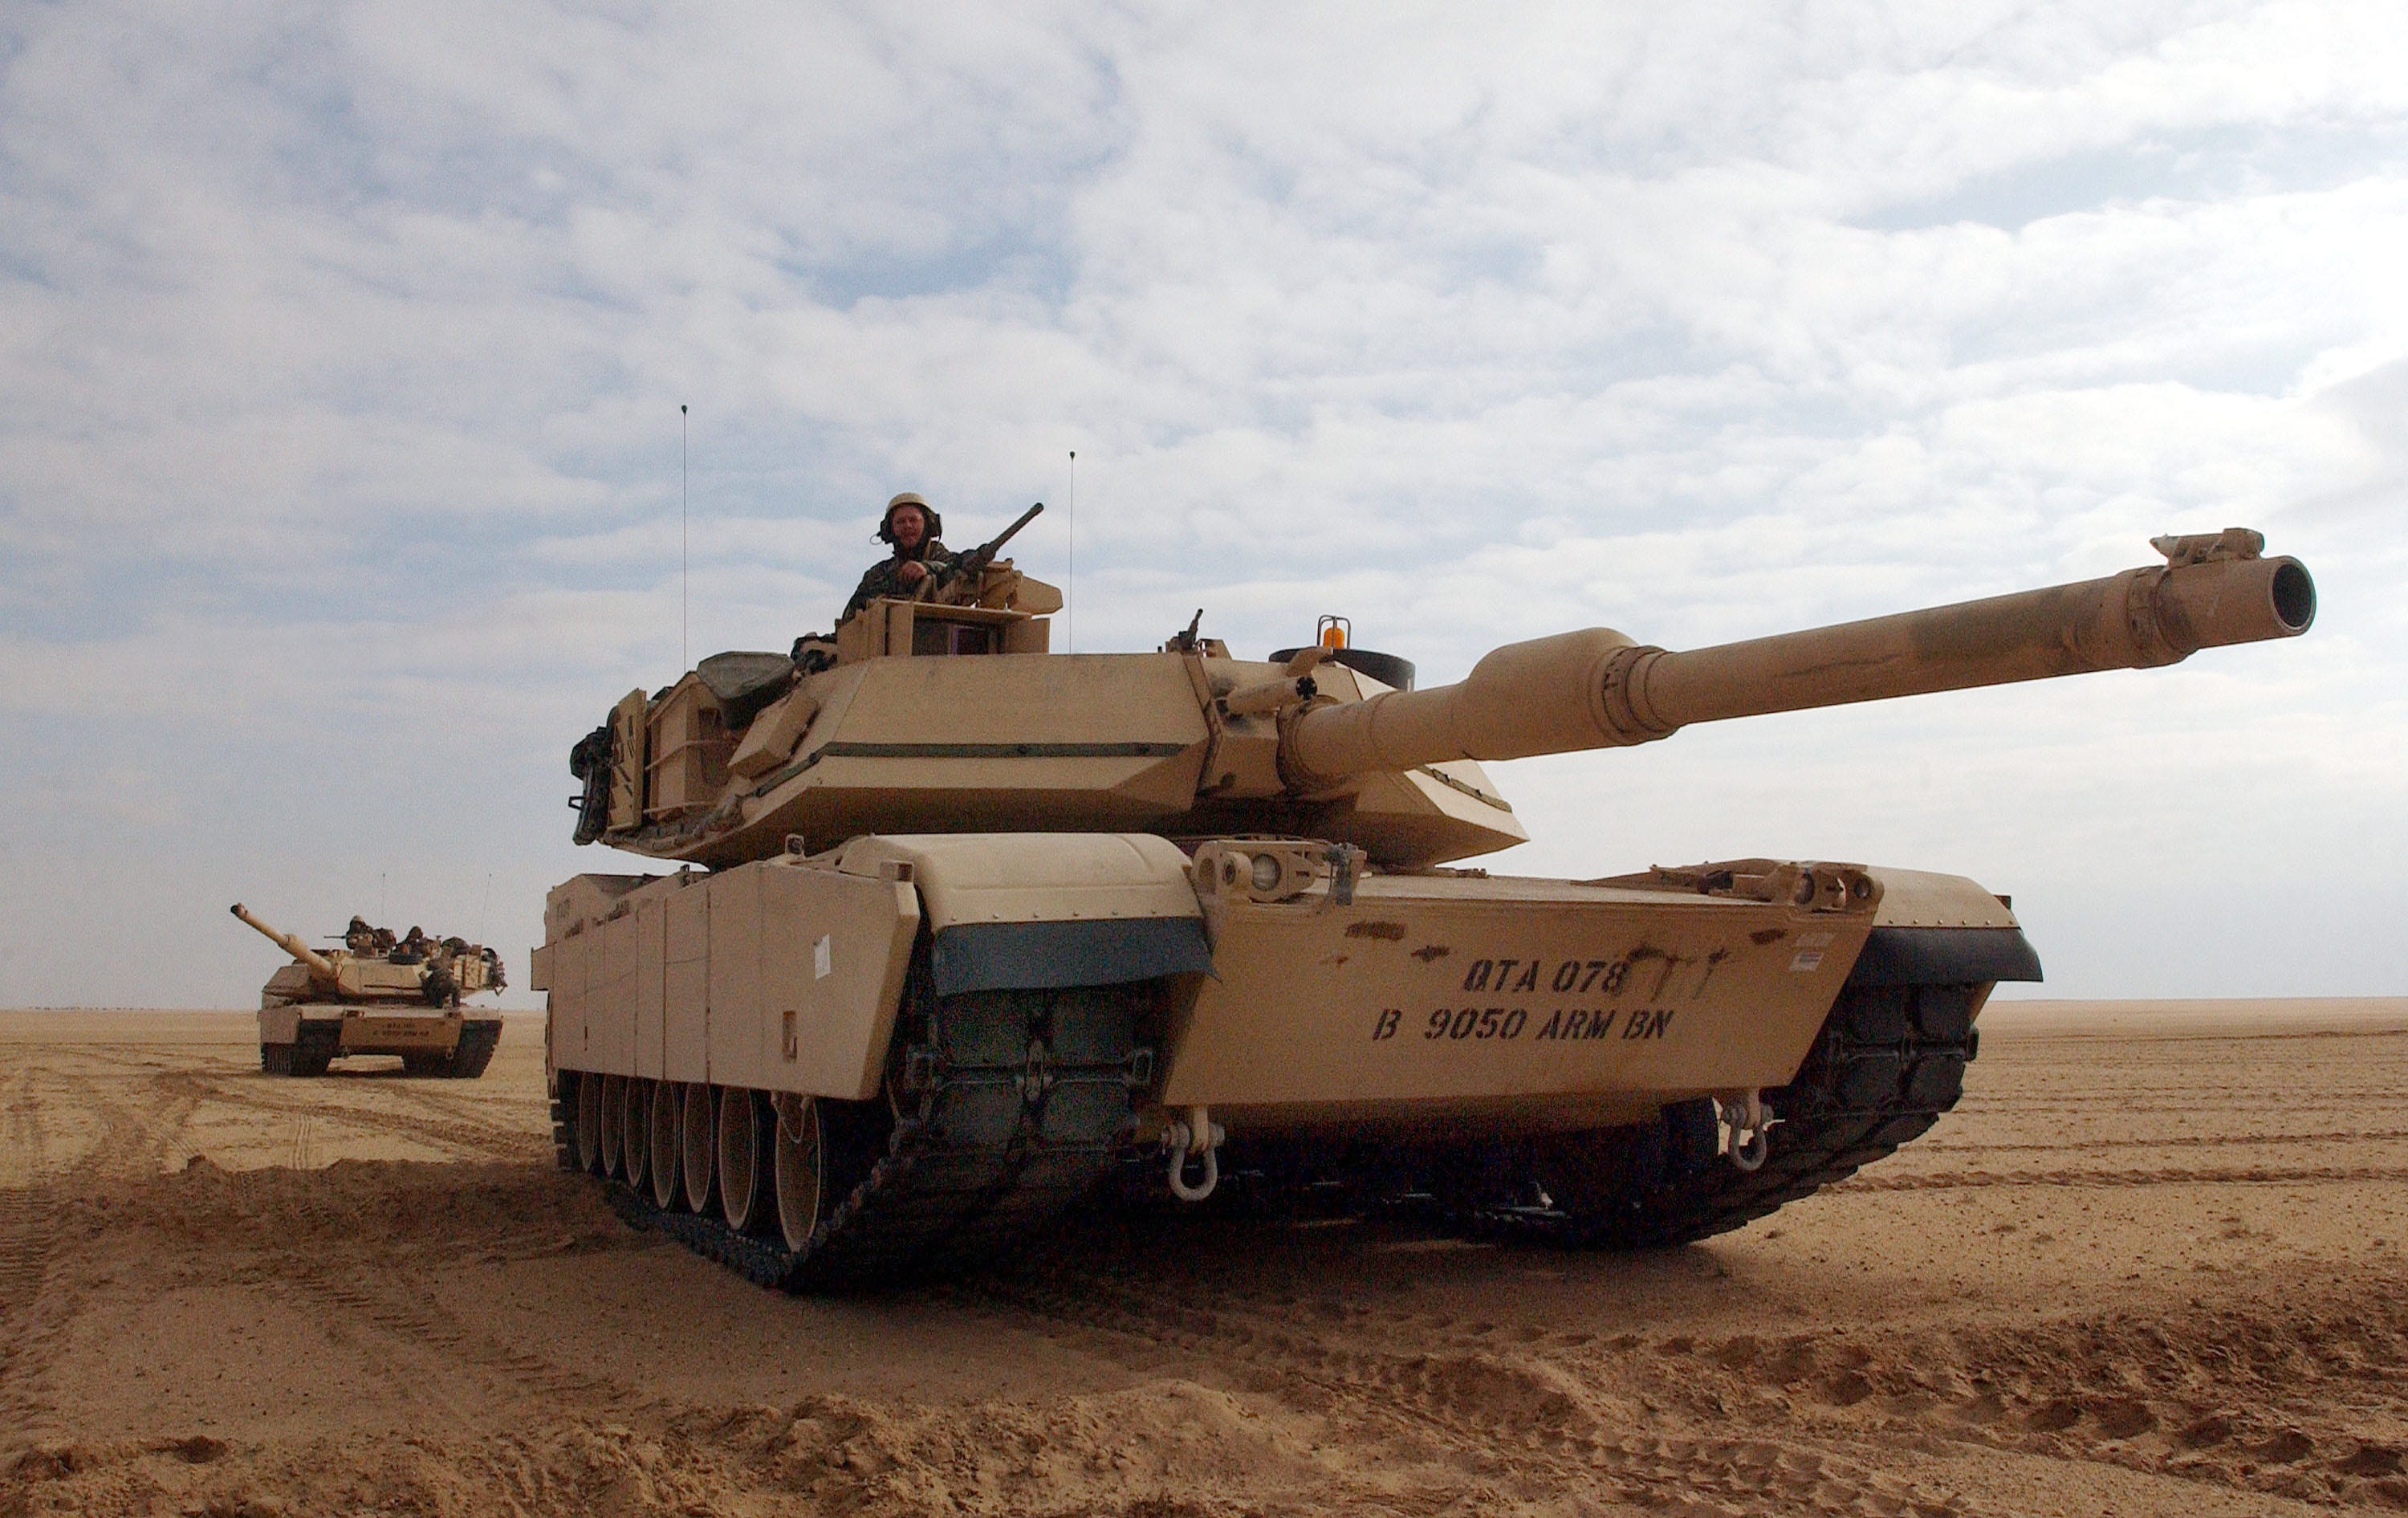 As Biden seeks to avoid wider war, delivery of M1 Abrams tanks to Ukraine escalates conflict